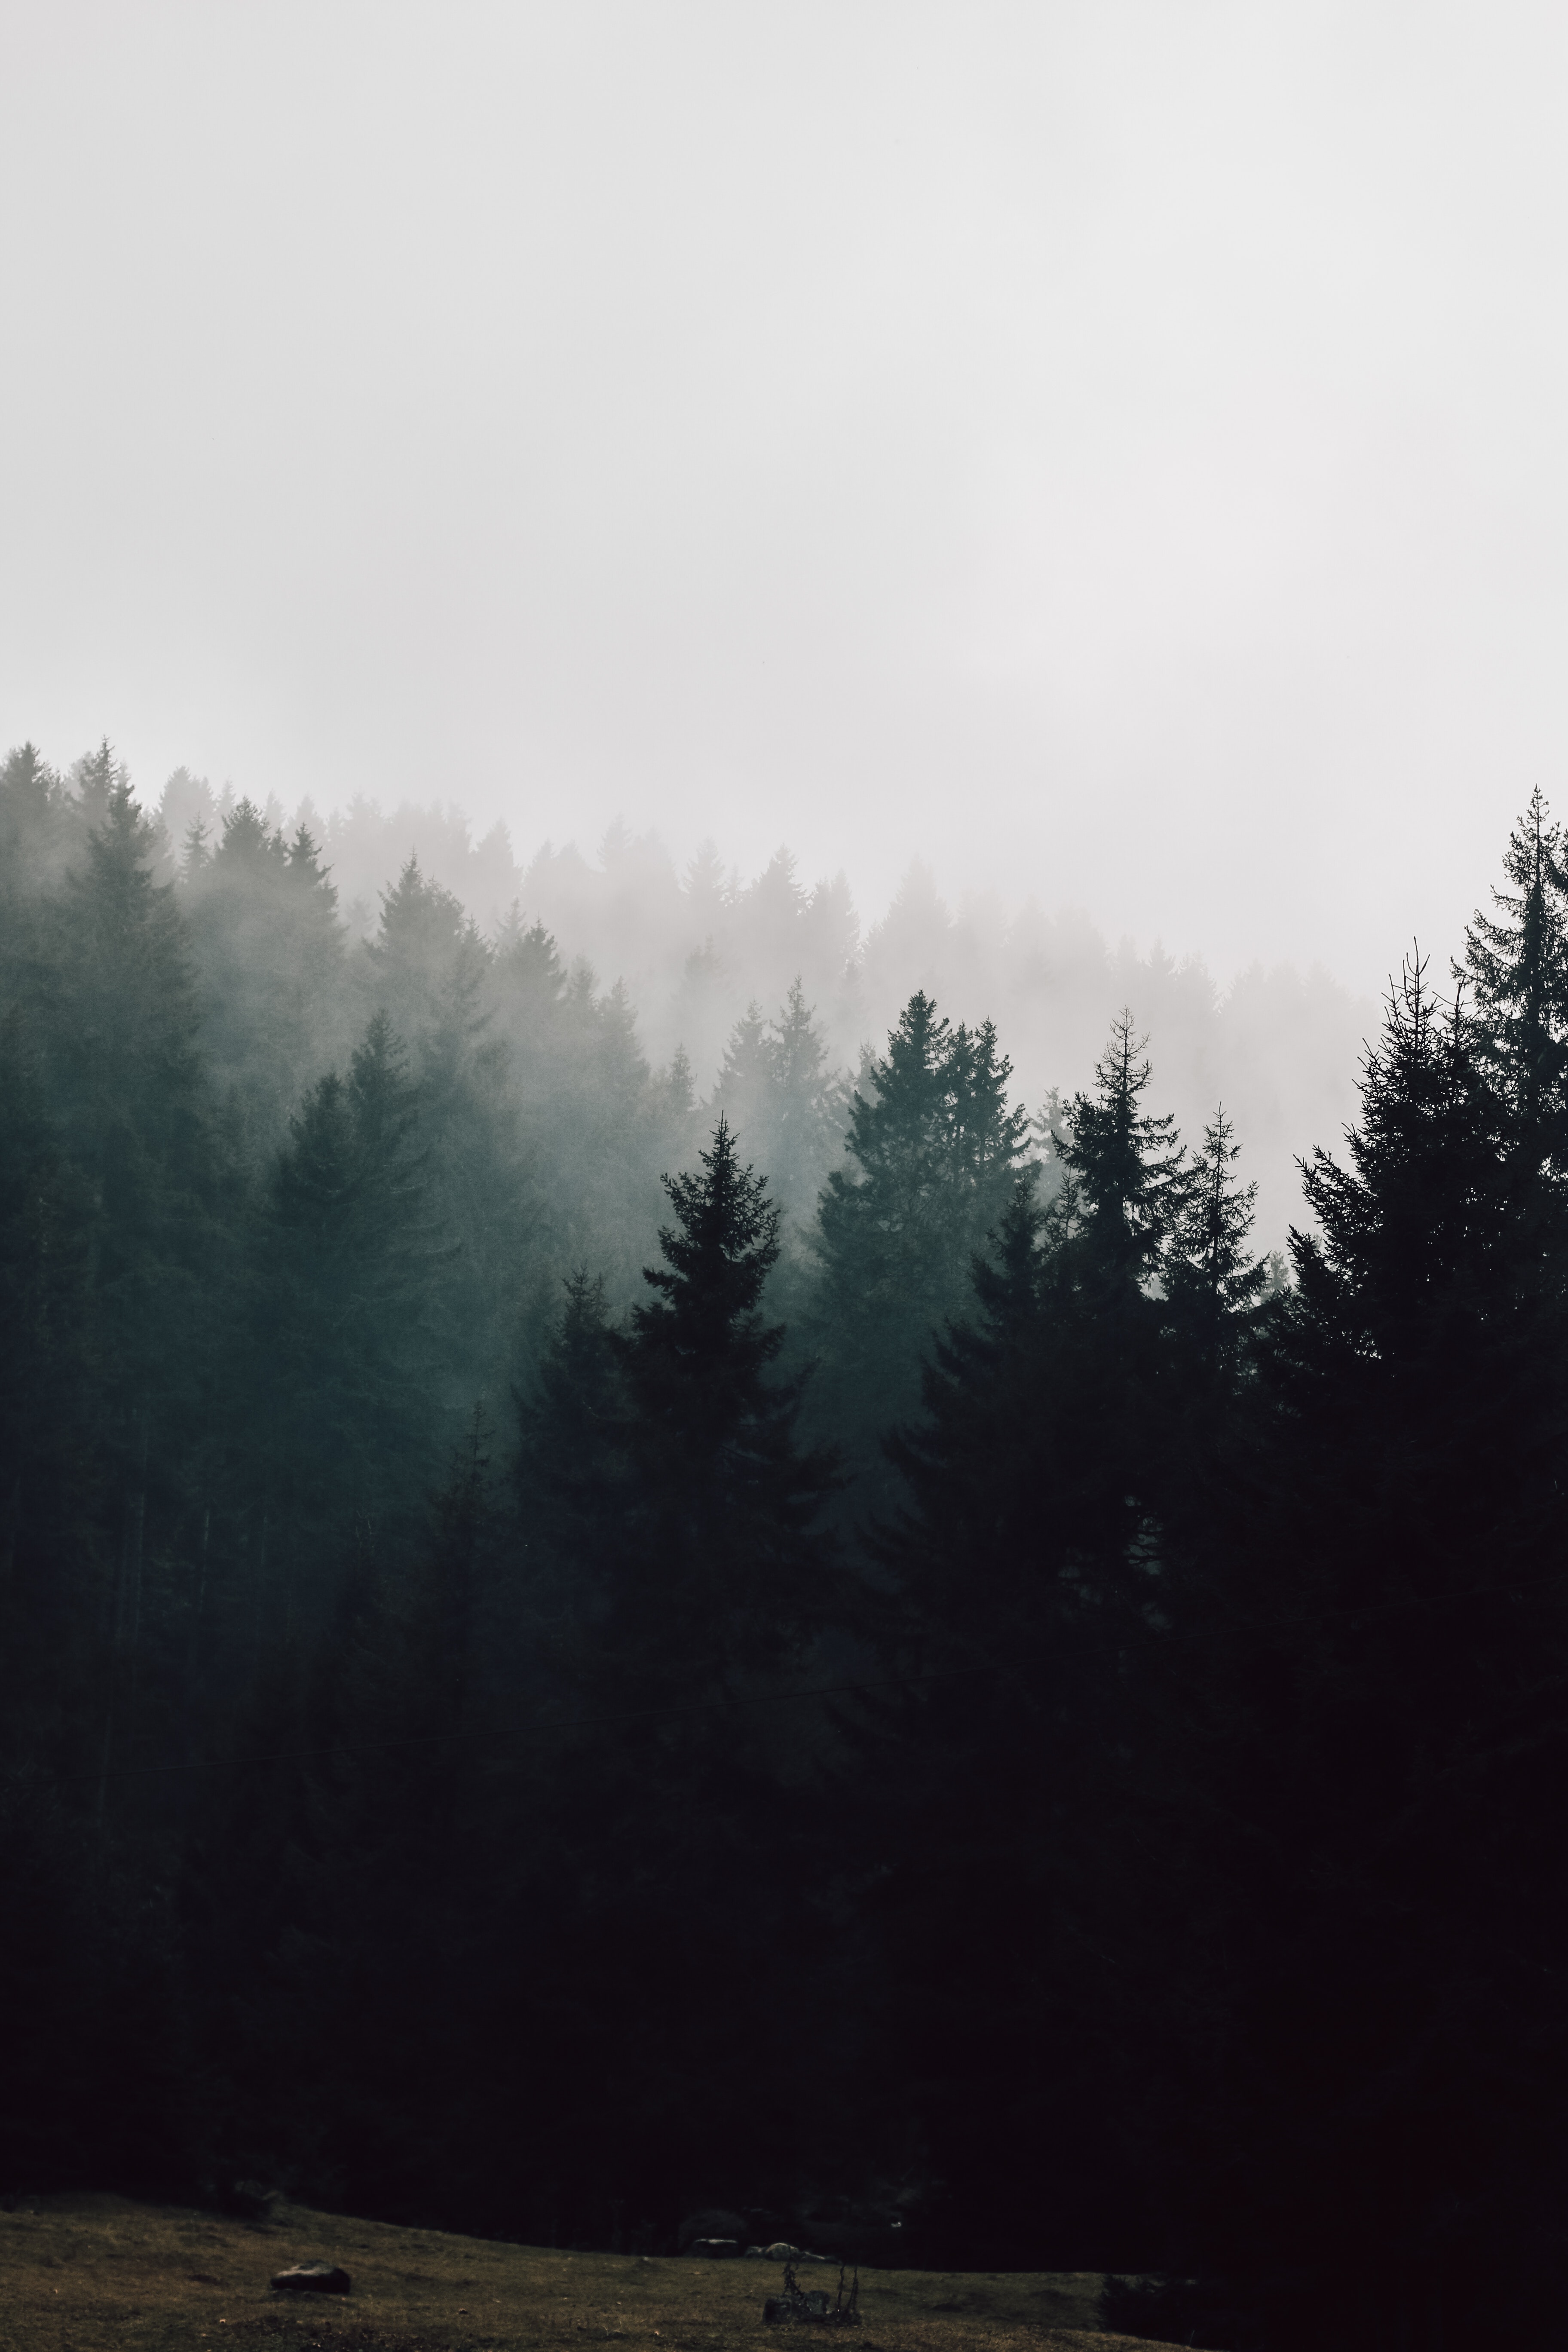 Tumblr Forest Aesthetic Wallpapers